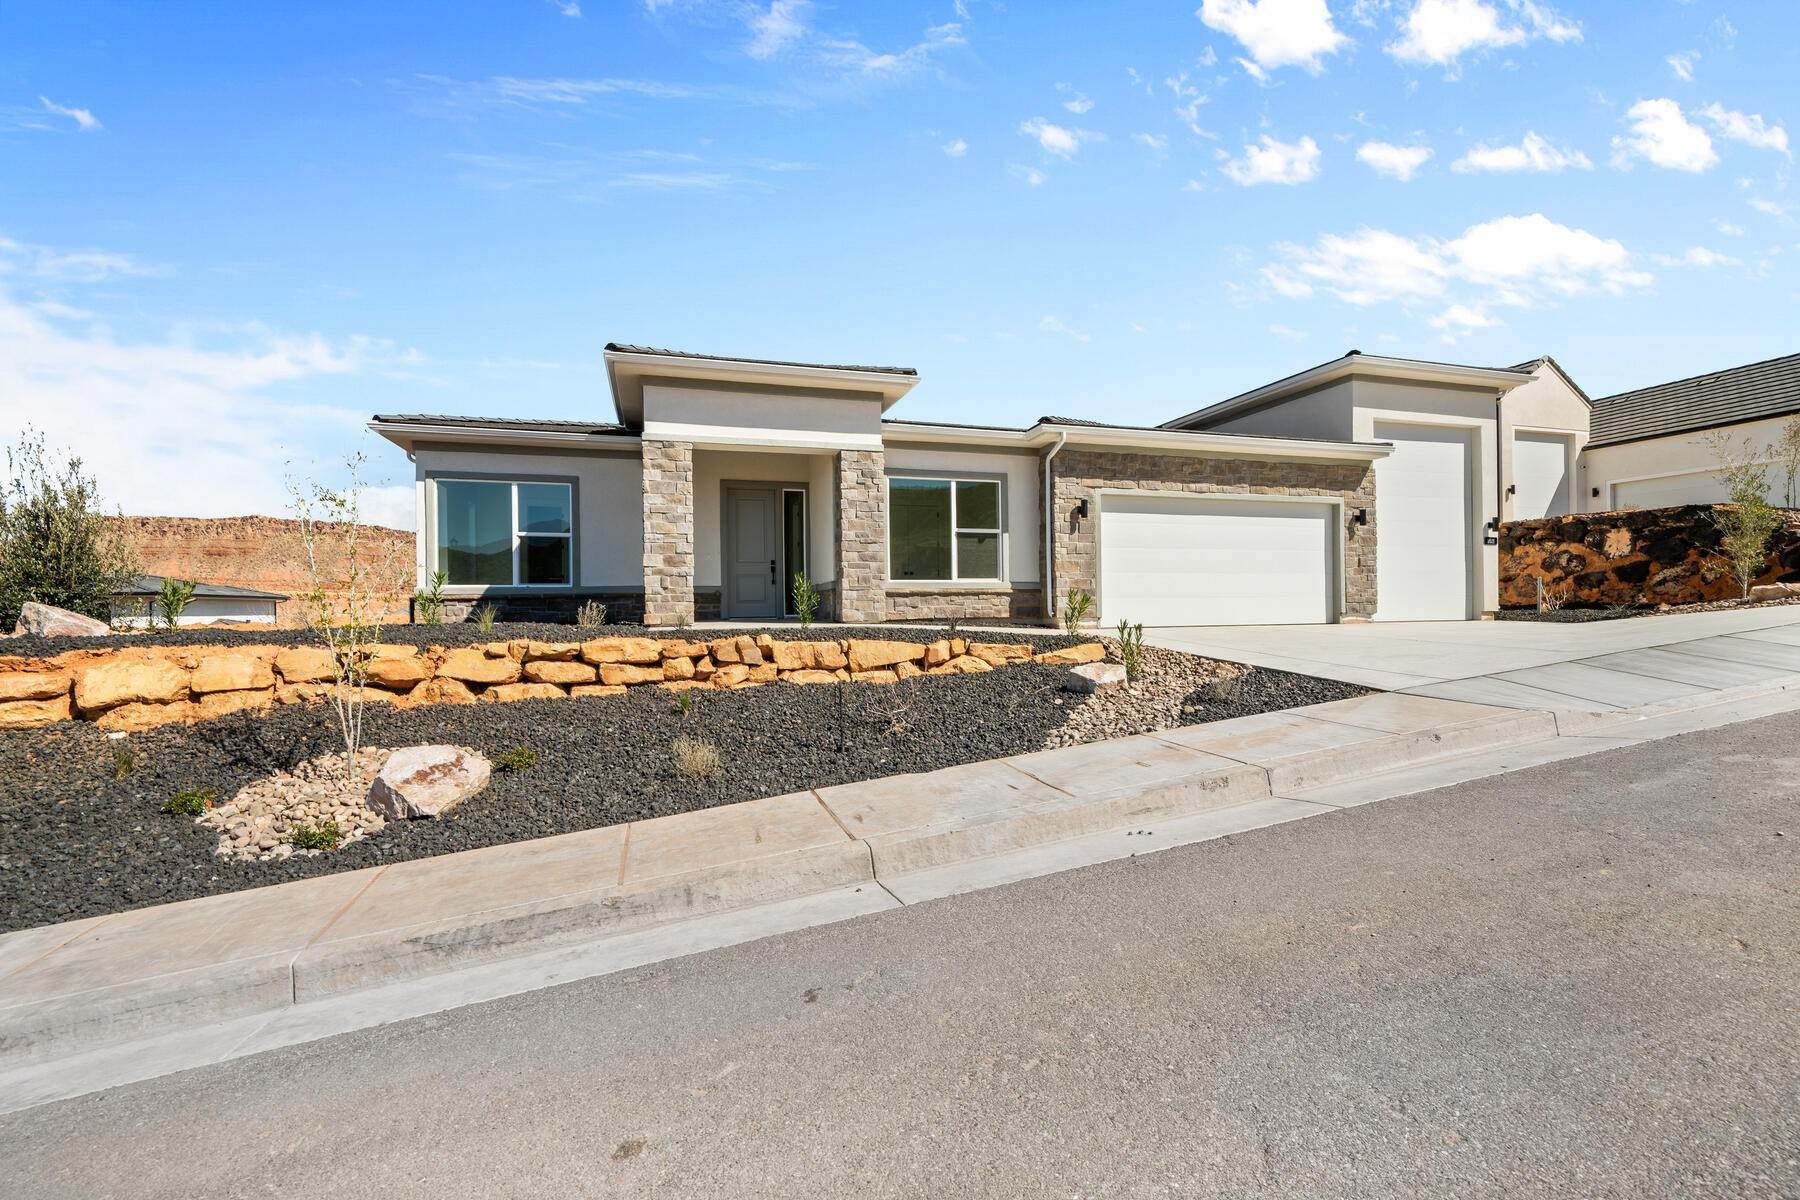 Single Family Homes for Sale at Welcome To Shooting Star, Up And Coming Subdivision In Washington Fields! 1611 E Centaurus Way, Lot 92 Washington, Utah 84780 United States